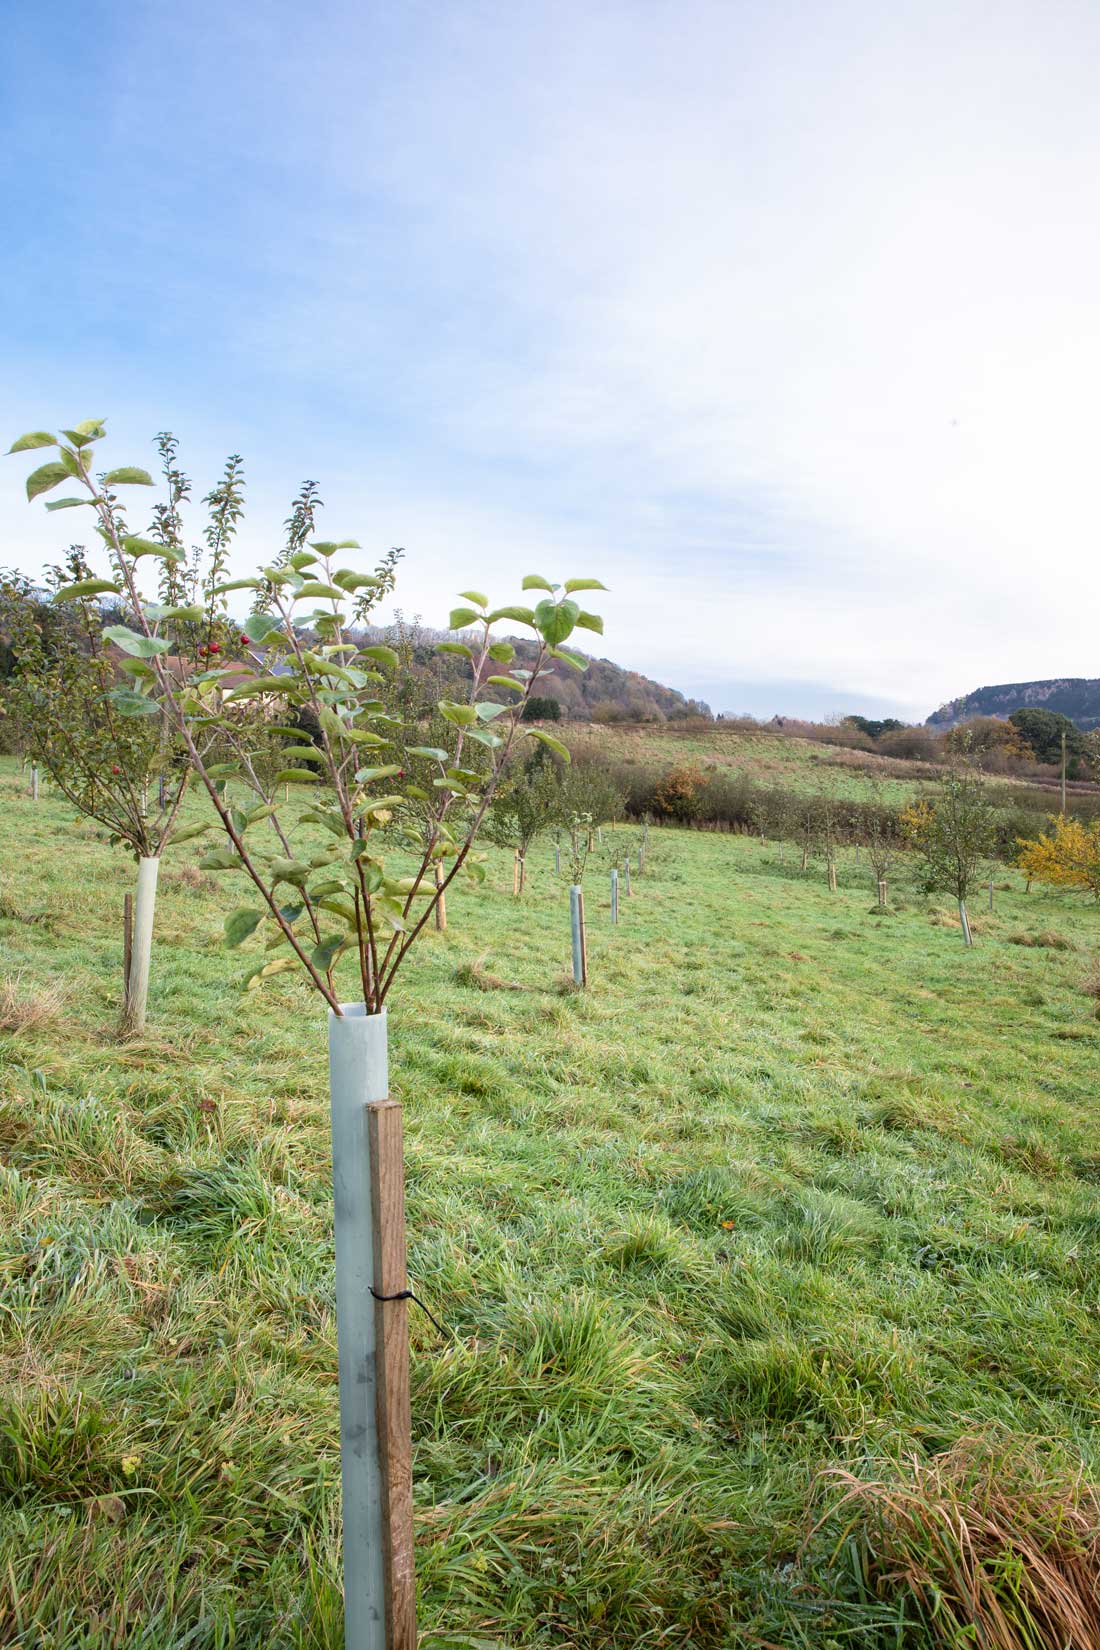 Newly planted apple trees among an orchard. Credit Charlie Fox.